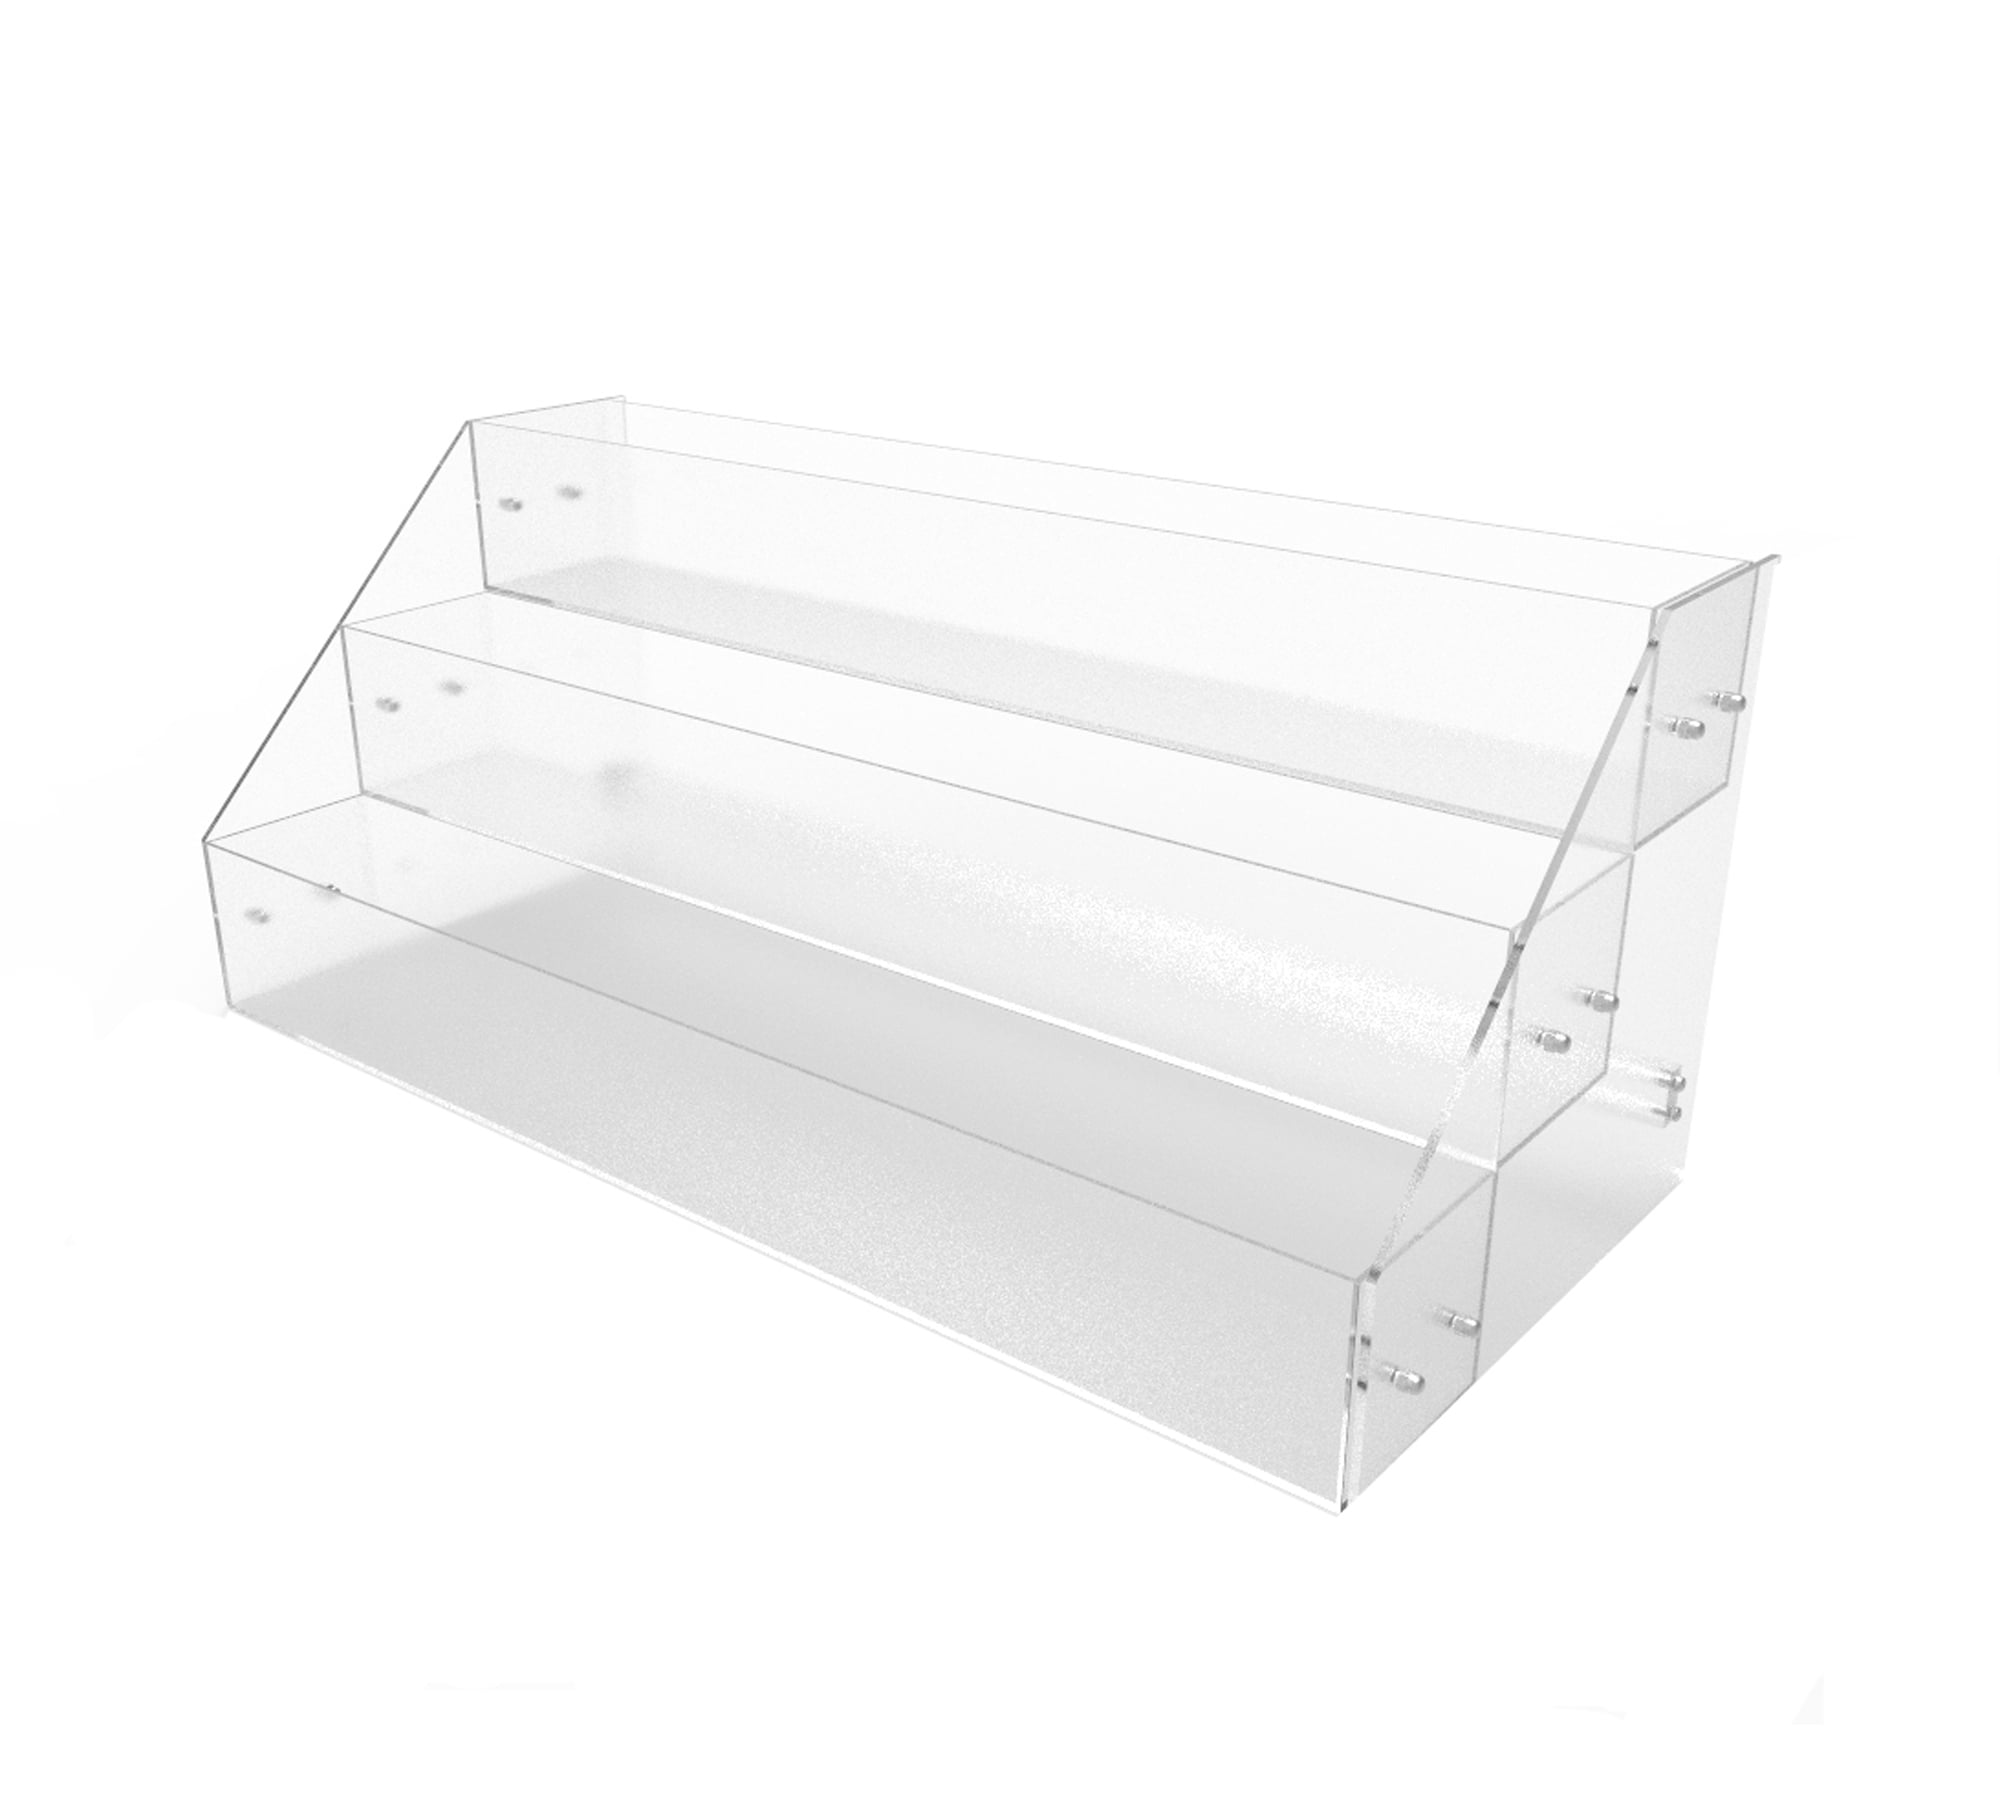 OnDisplay Acrylic 2 Section Flip Top Storage Bin for Coffee  Pods/Candy/Tea/Bulk Items - Office/Home/Retail Store Display Organizer -  Vandue